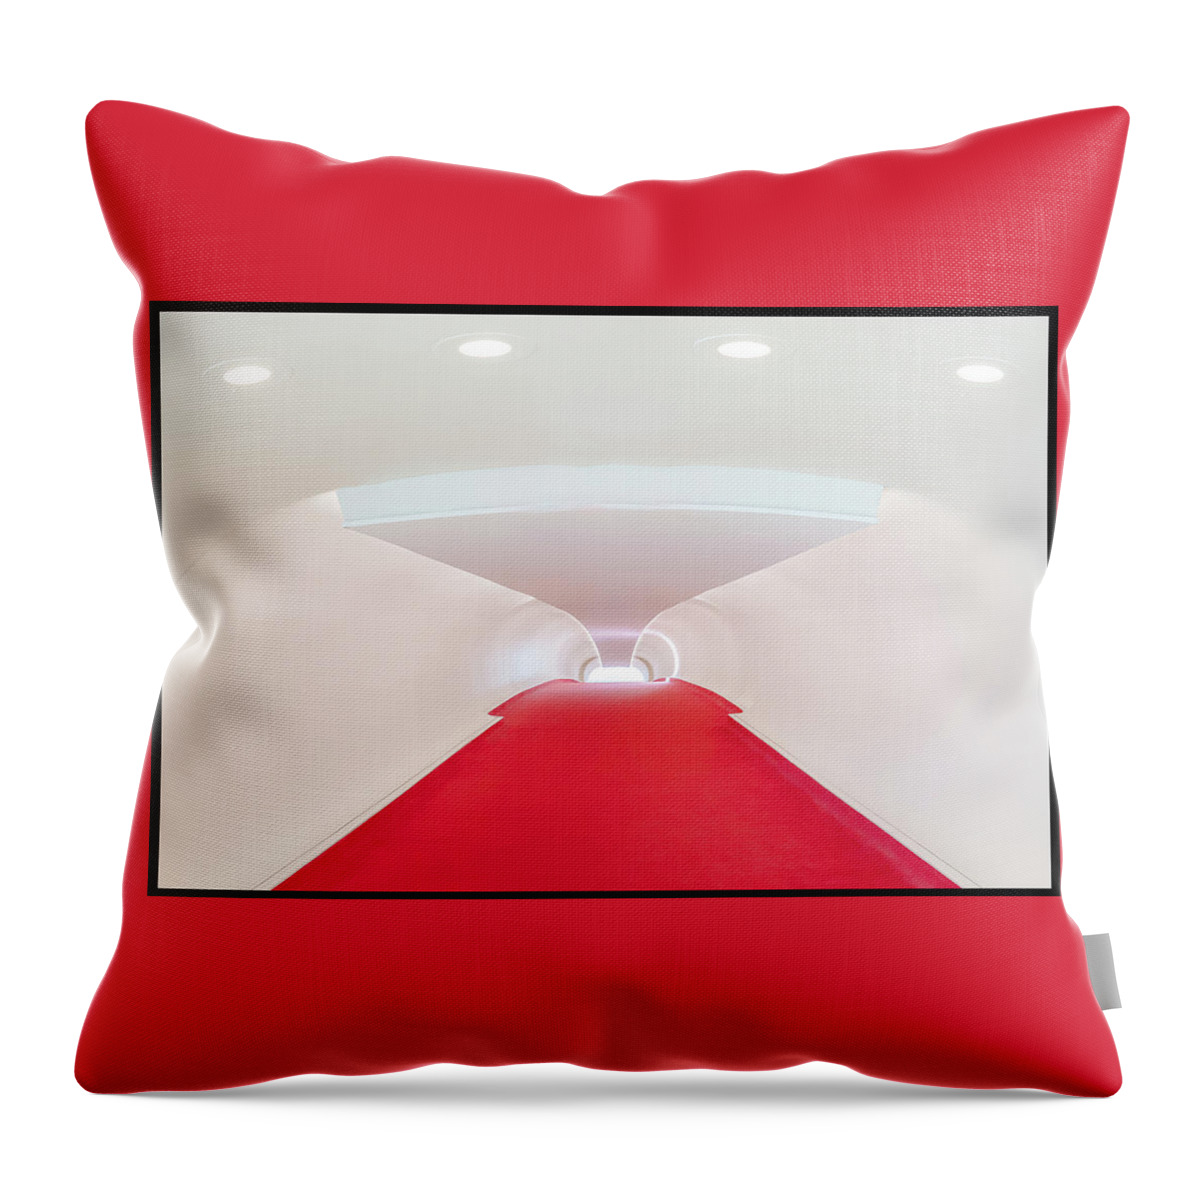 Twa Throw Pillow featuring the photograph Catch Me If You Can by Sylvia Goldkranz